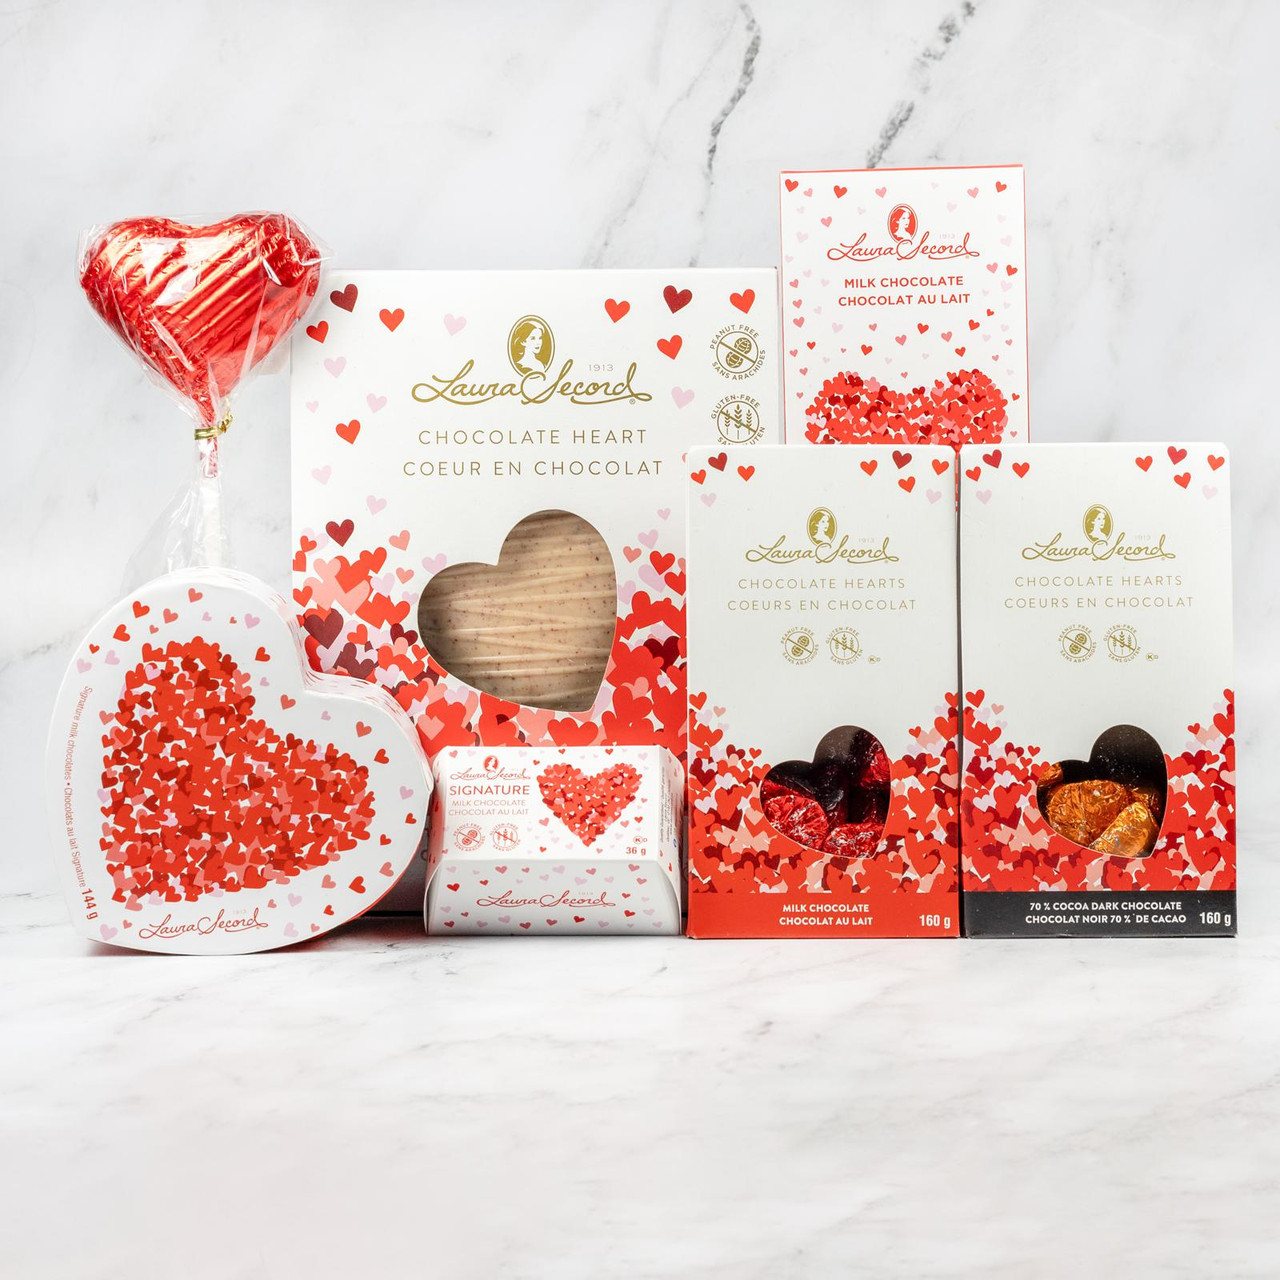 Various chocolate gift boxes displayed on a clean background